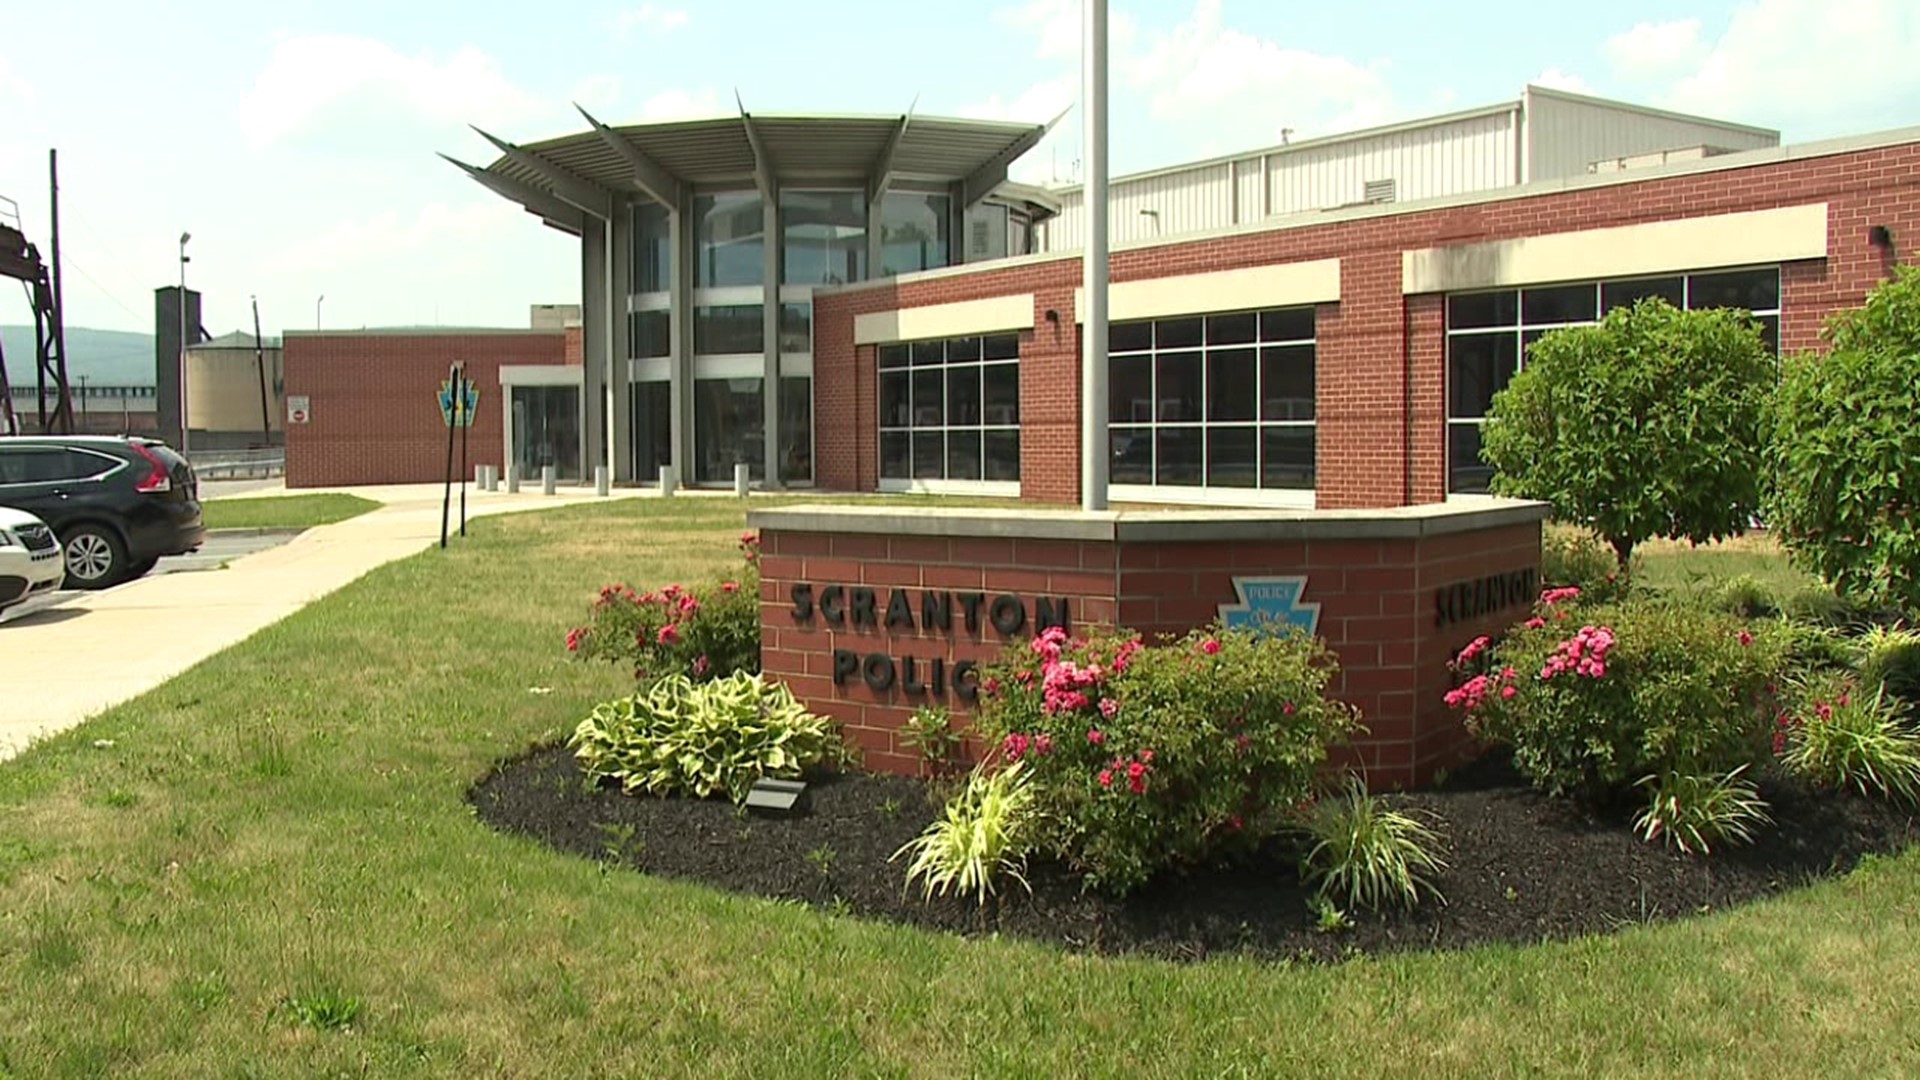 The Scranton Police Department confirmed the death of Officer John Hallock, who died at a home in Luzerne County over the weekend.